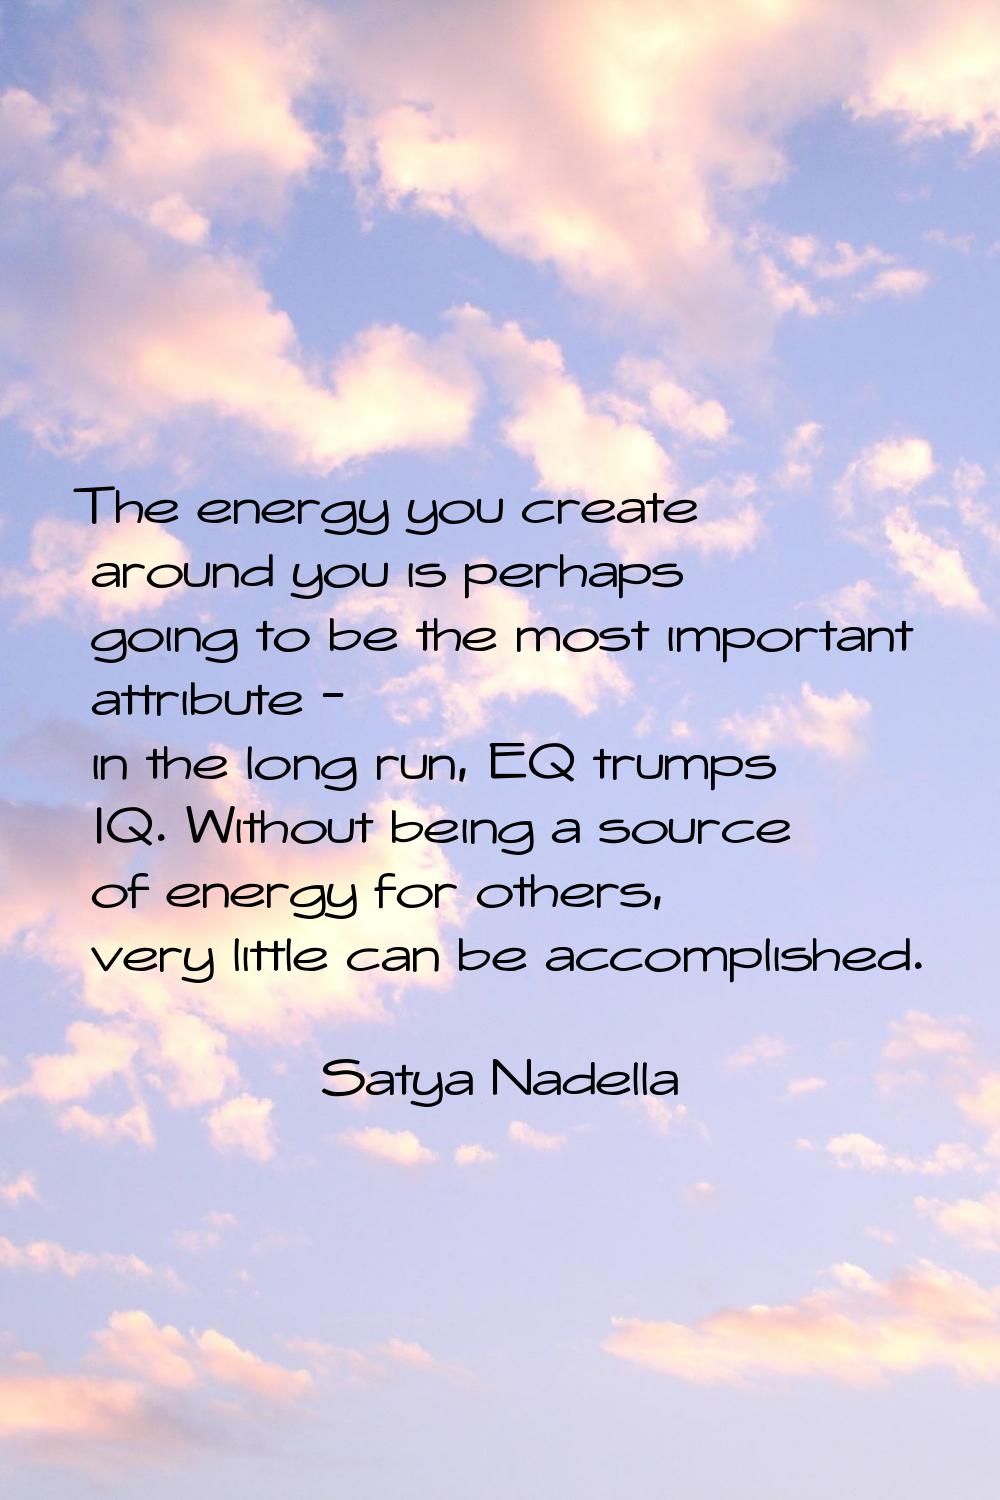 The energy you create around you is perhaps going to be the most important attribute - in the long 